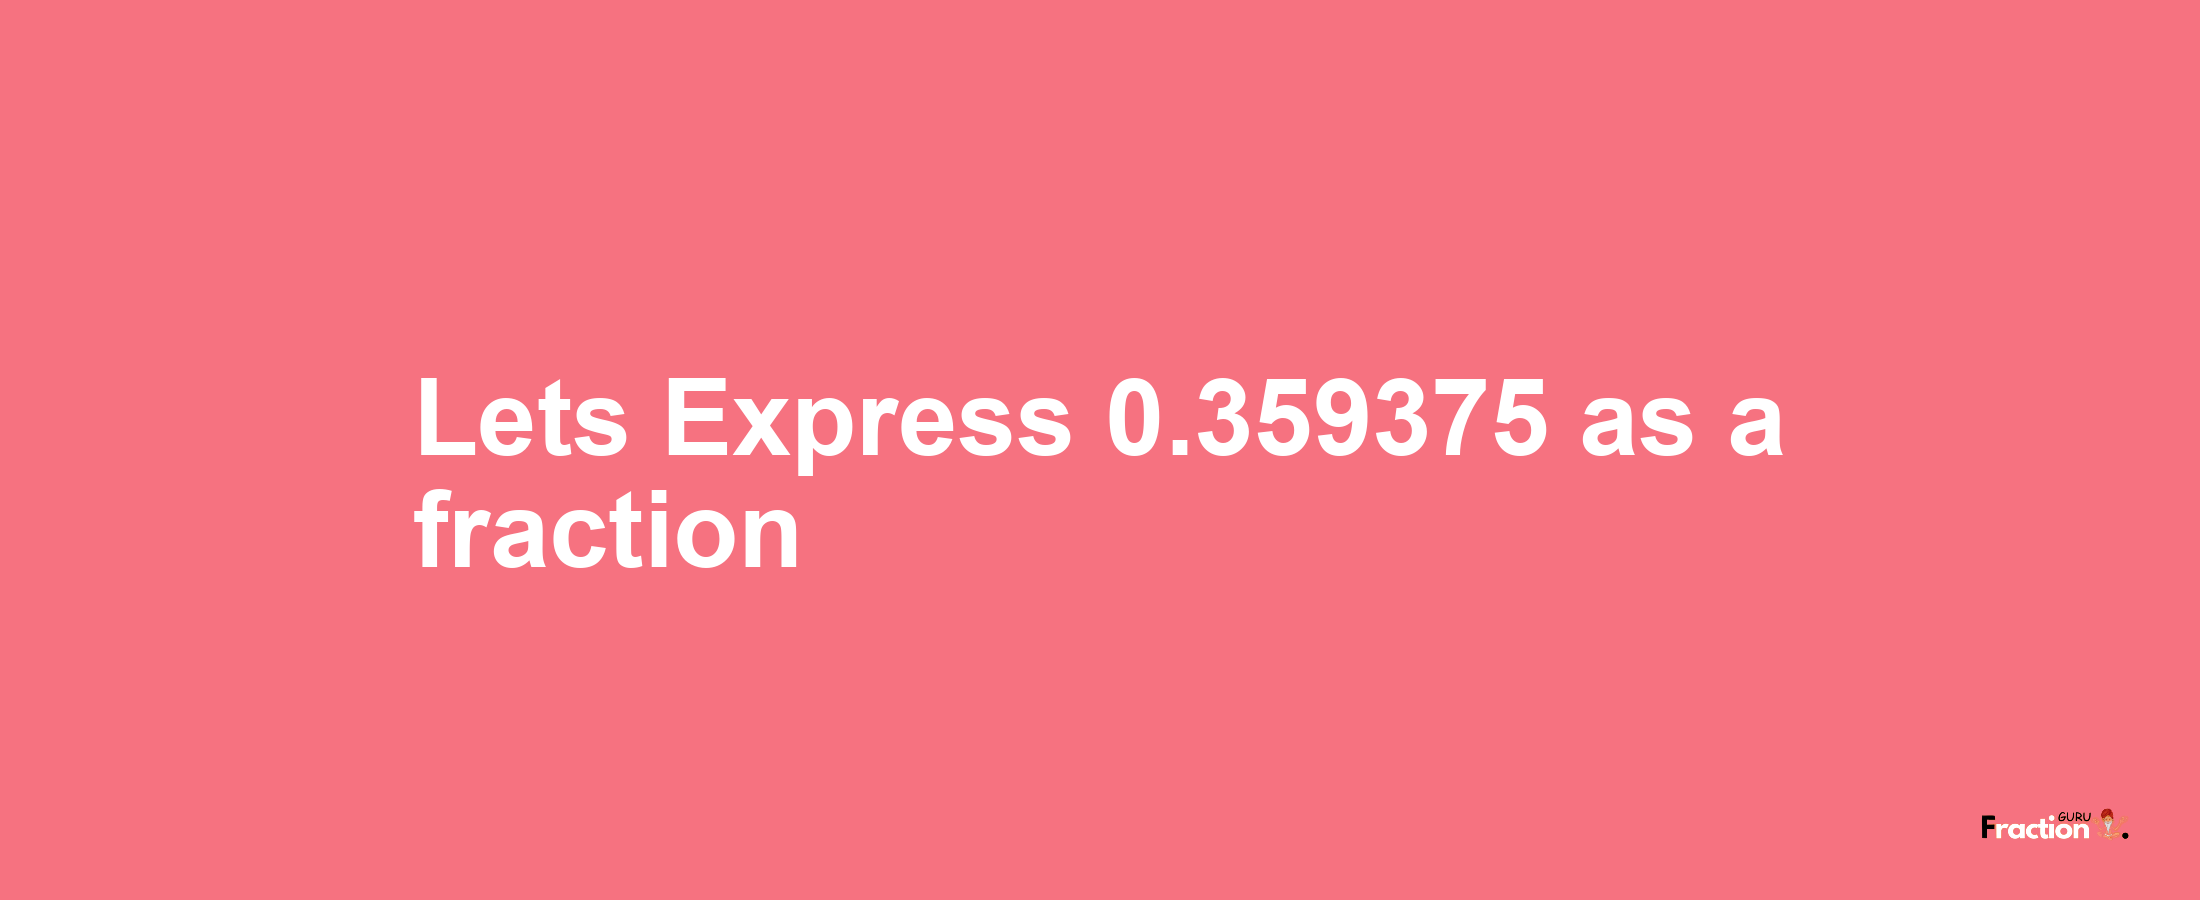 Lets Express 0.359375 as afraction